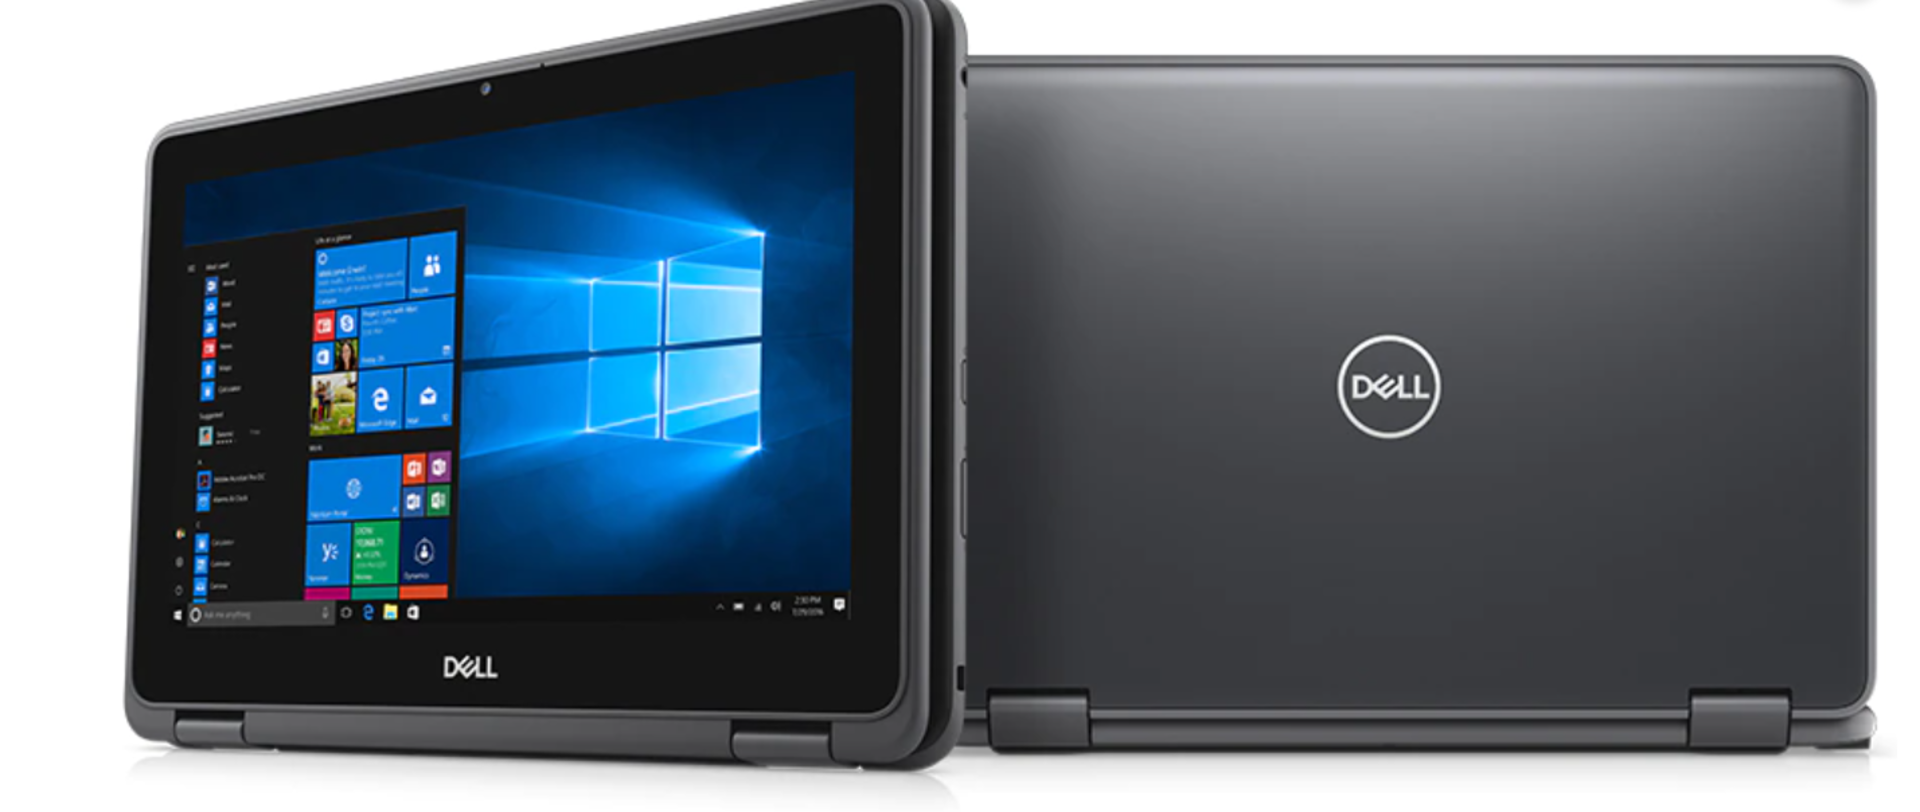 2 X NEW DELL LATITUDE 3190 TWO IN ONE LAPTOP TABLET RRP £495 EACH - Image 2 of 5